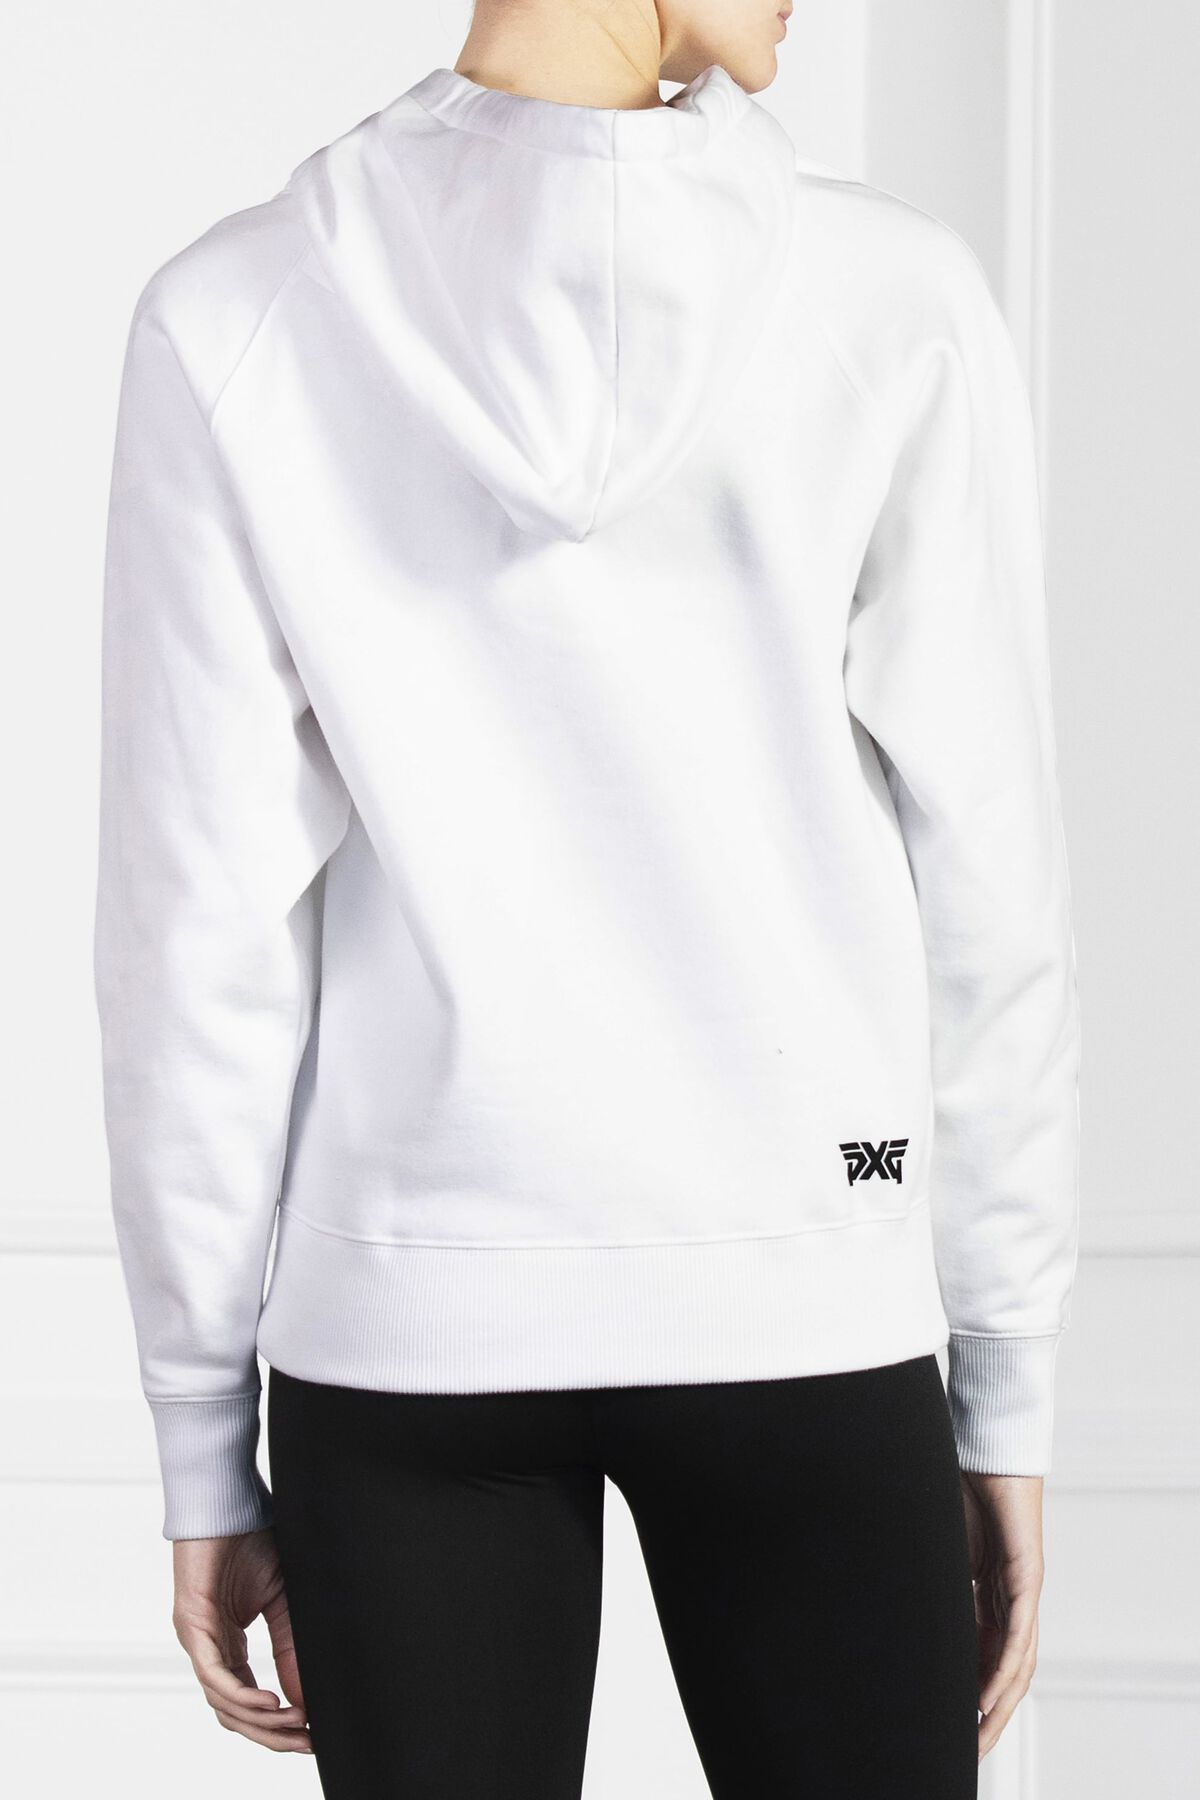 Home Course Hoodie Unisex 